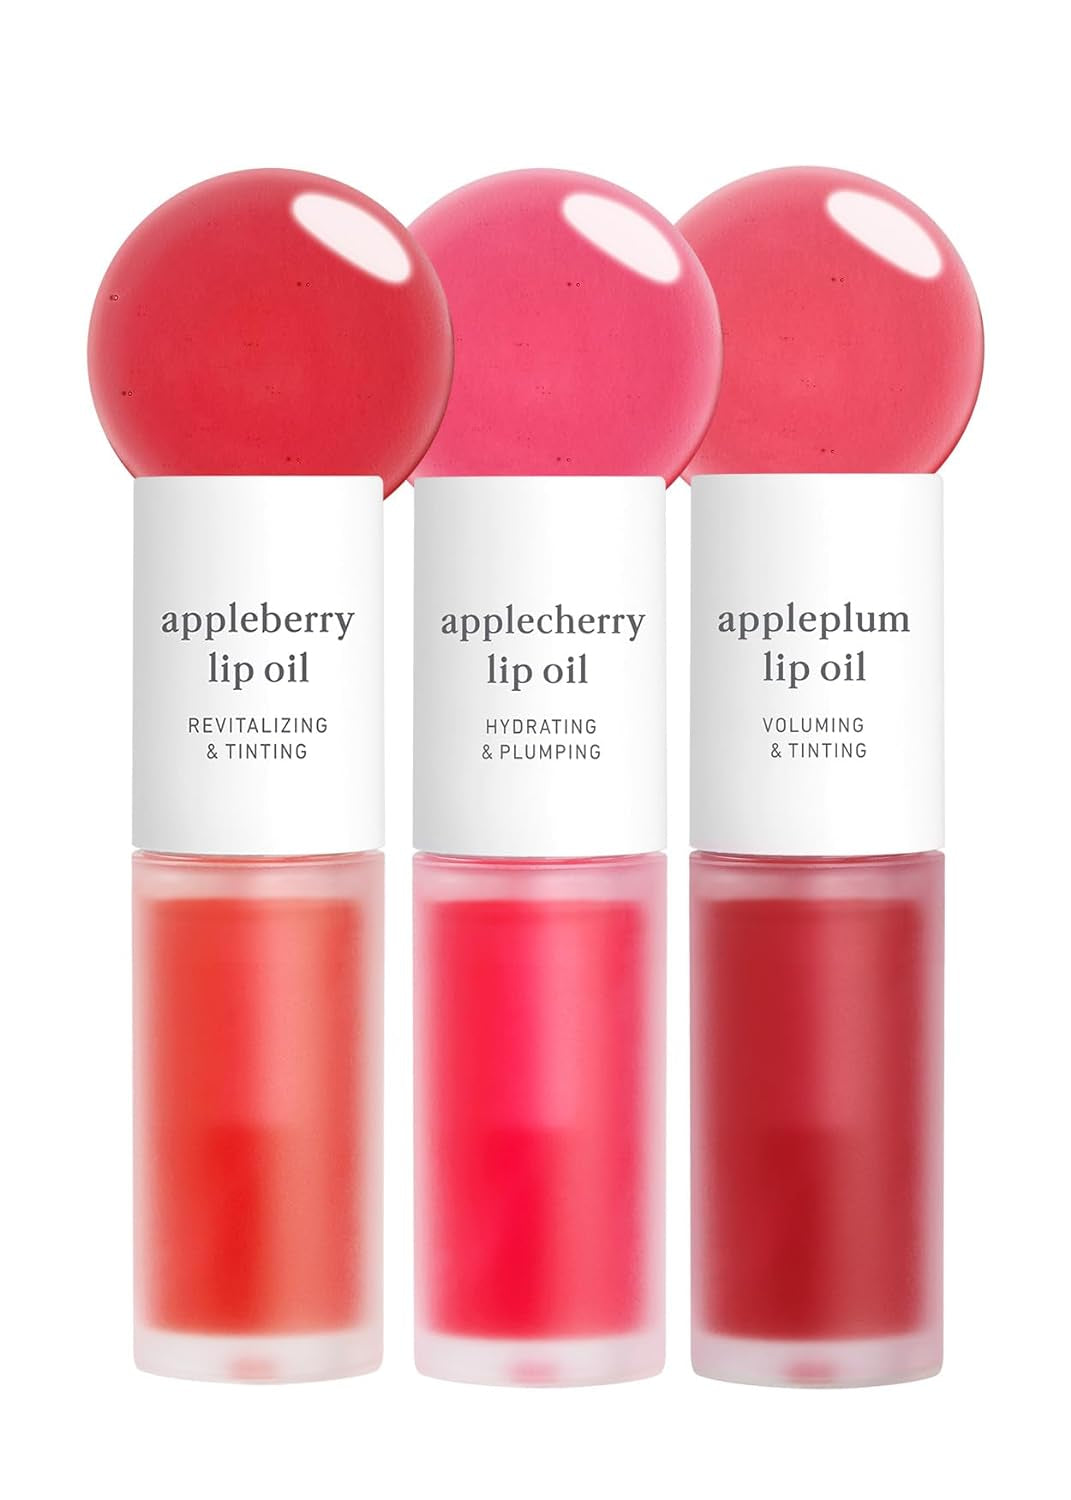 NOONI Korean Lip Oil - Appleberry | Lip Stain, Gift, Long-Lasting, Moisturizing, Plumping, Revitalizing, and Tinting for Dry Lips with Raspberry Fruit Extract, Glass Skin Look, 0.12 Fl Oz